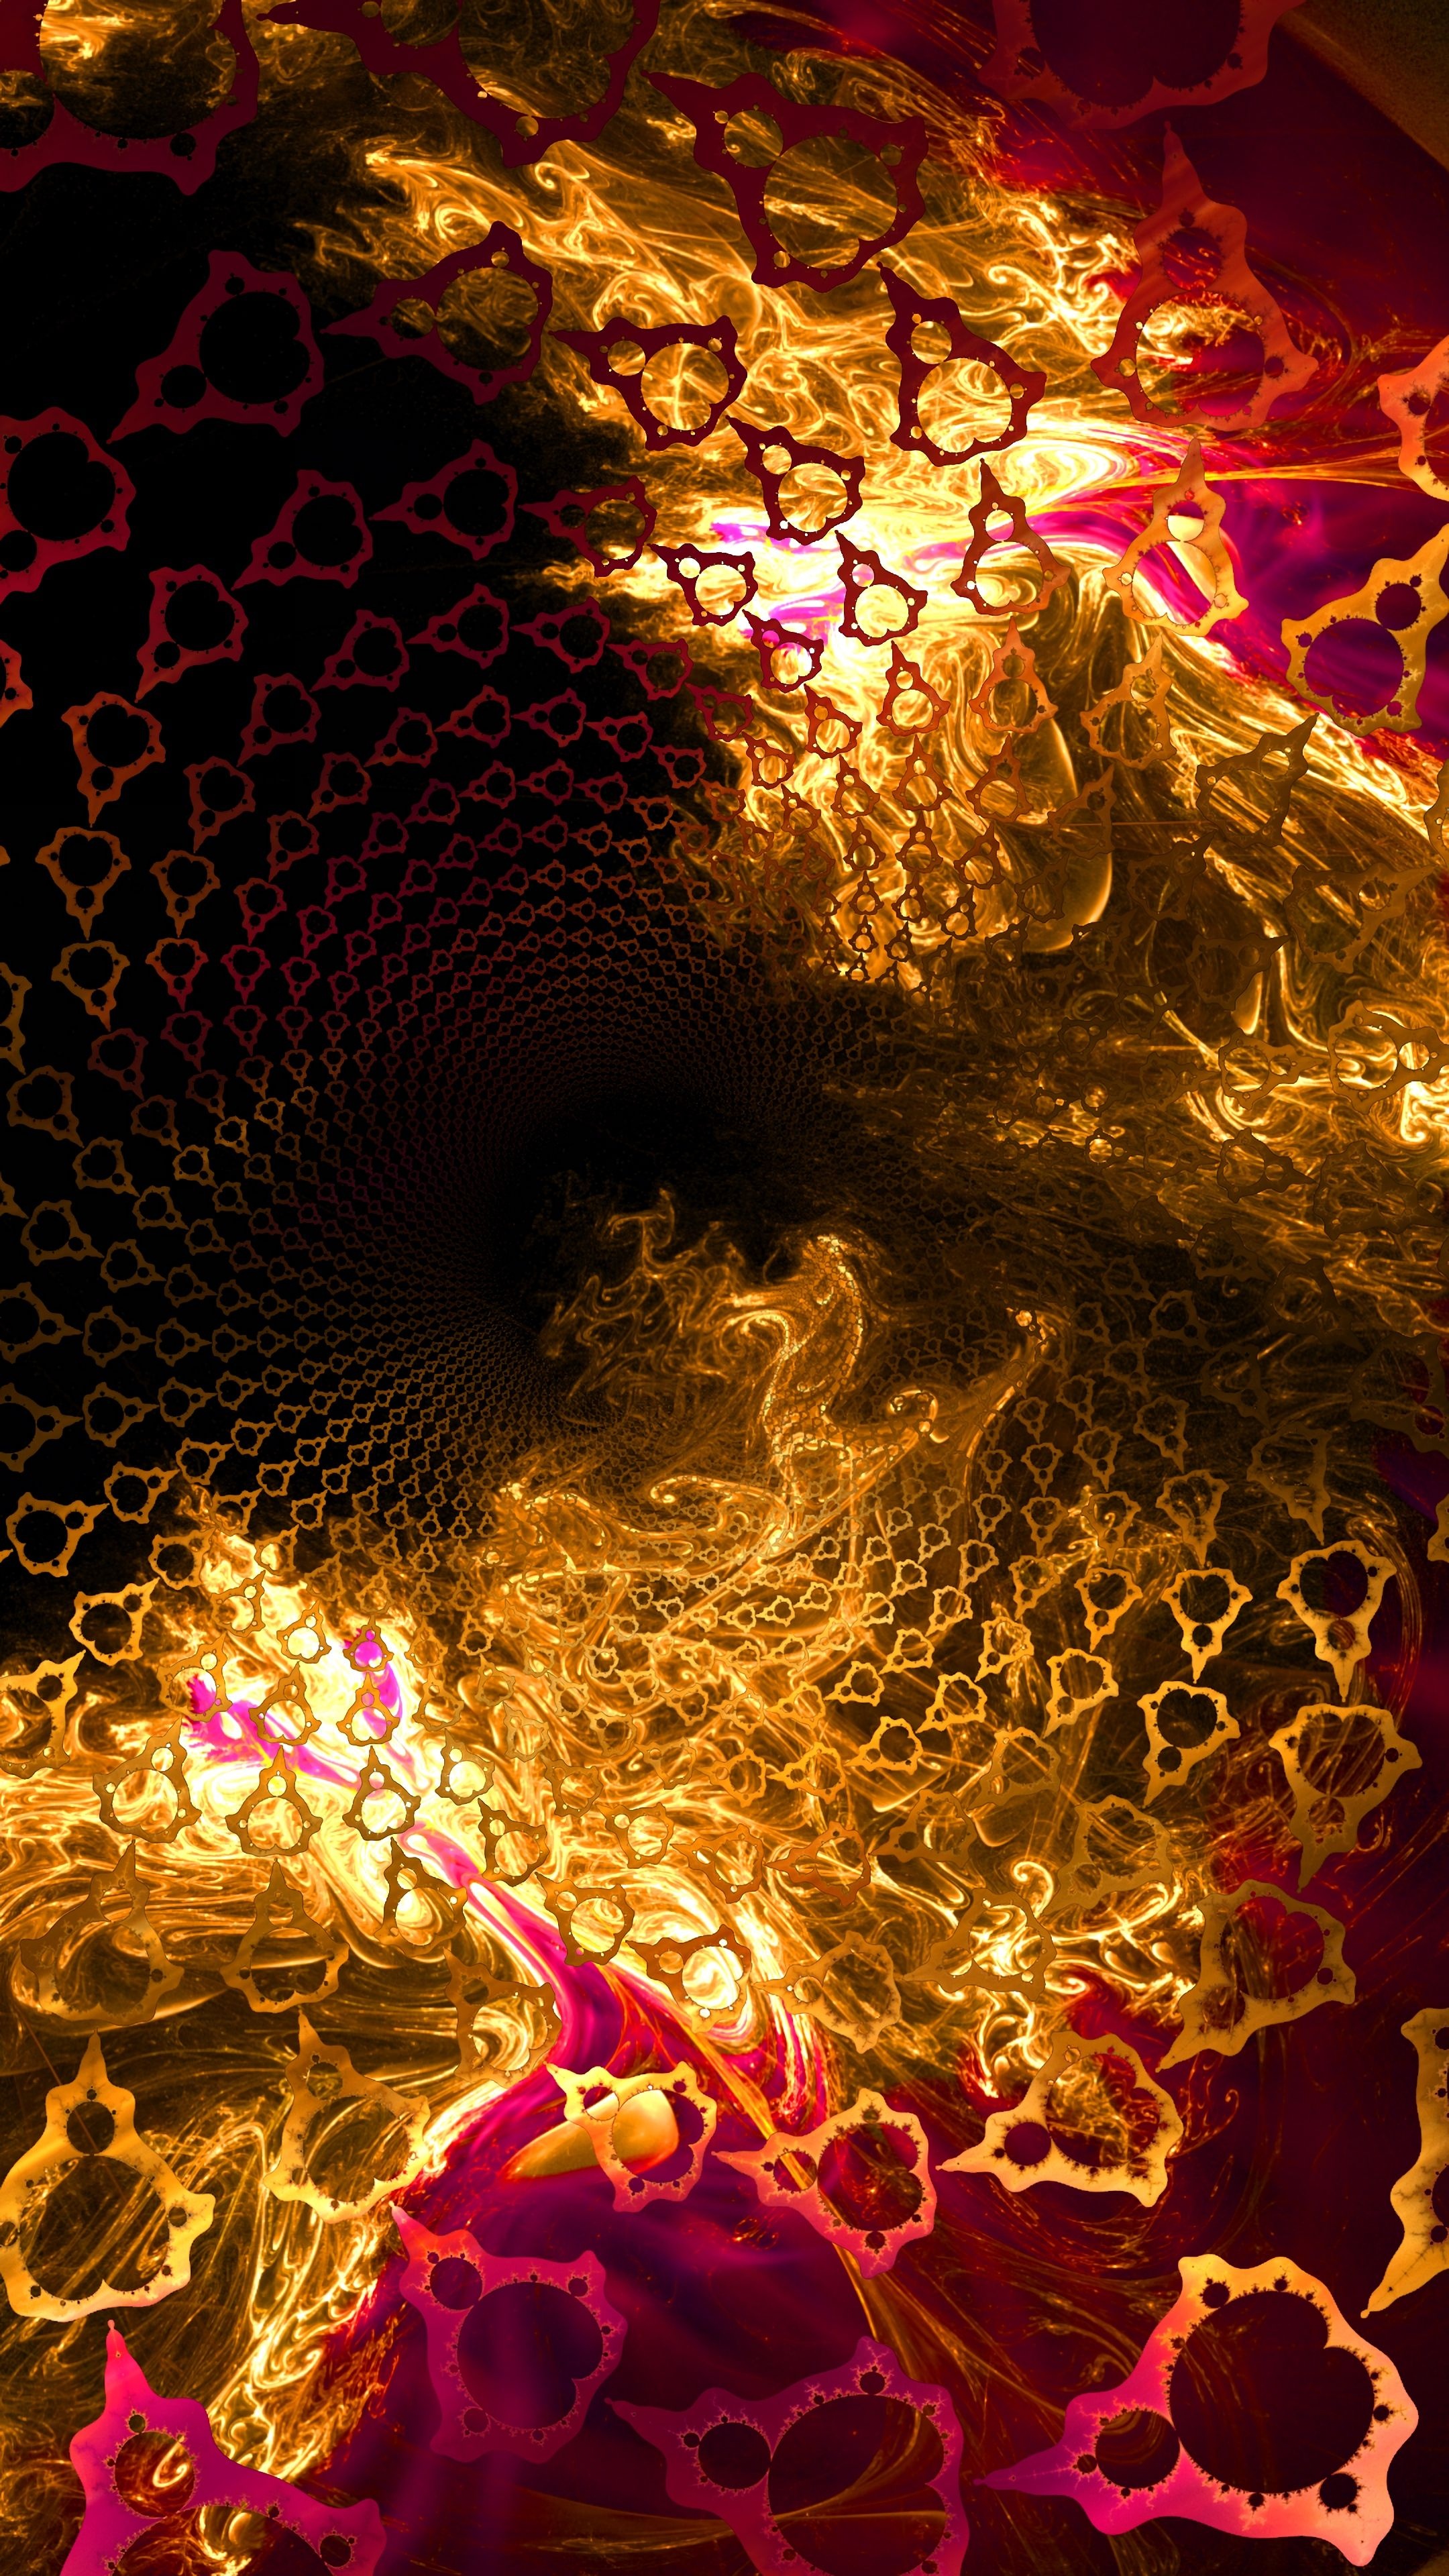 Fractal wallpapers, Light water fire pattern, Colorful imagery, Abstract design, 2160x3840 4K Phone